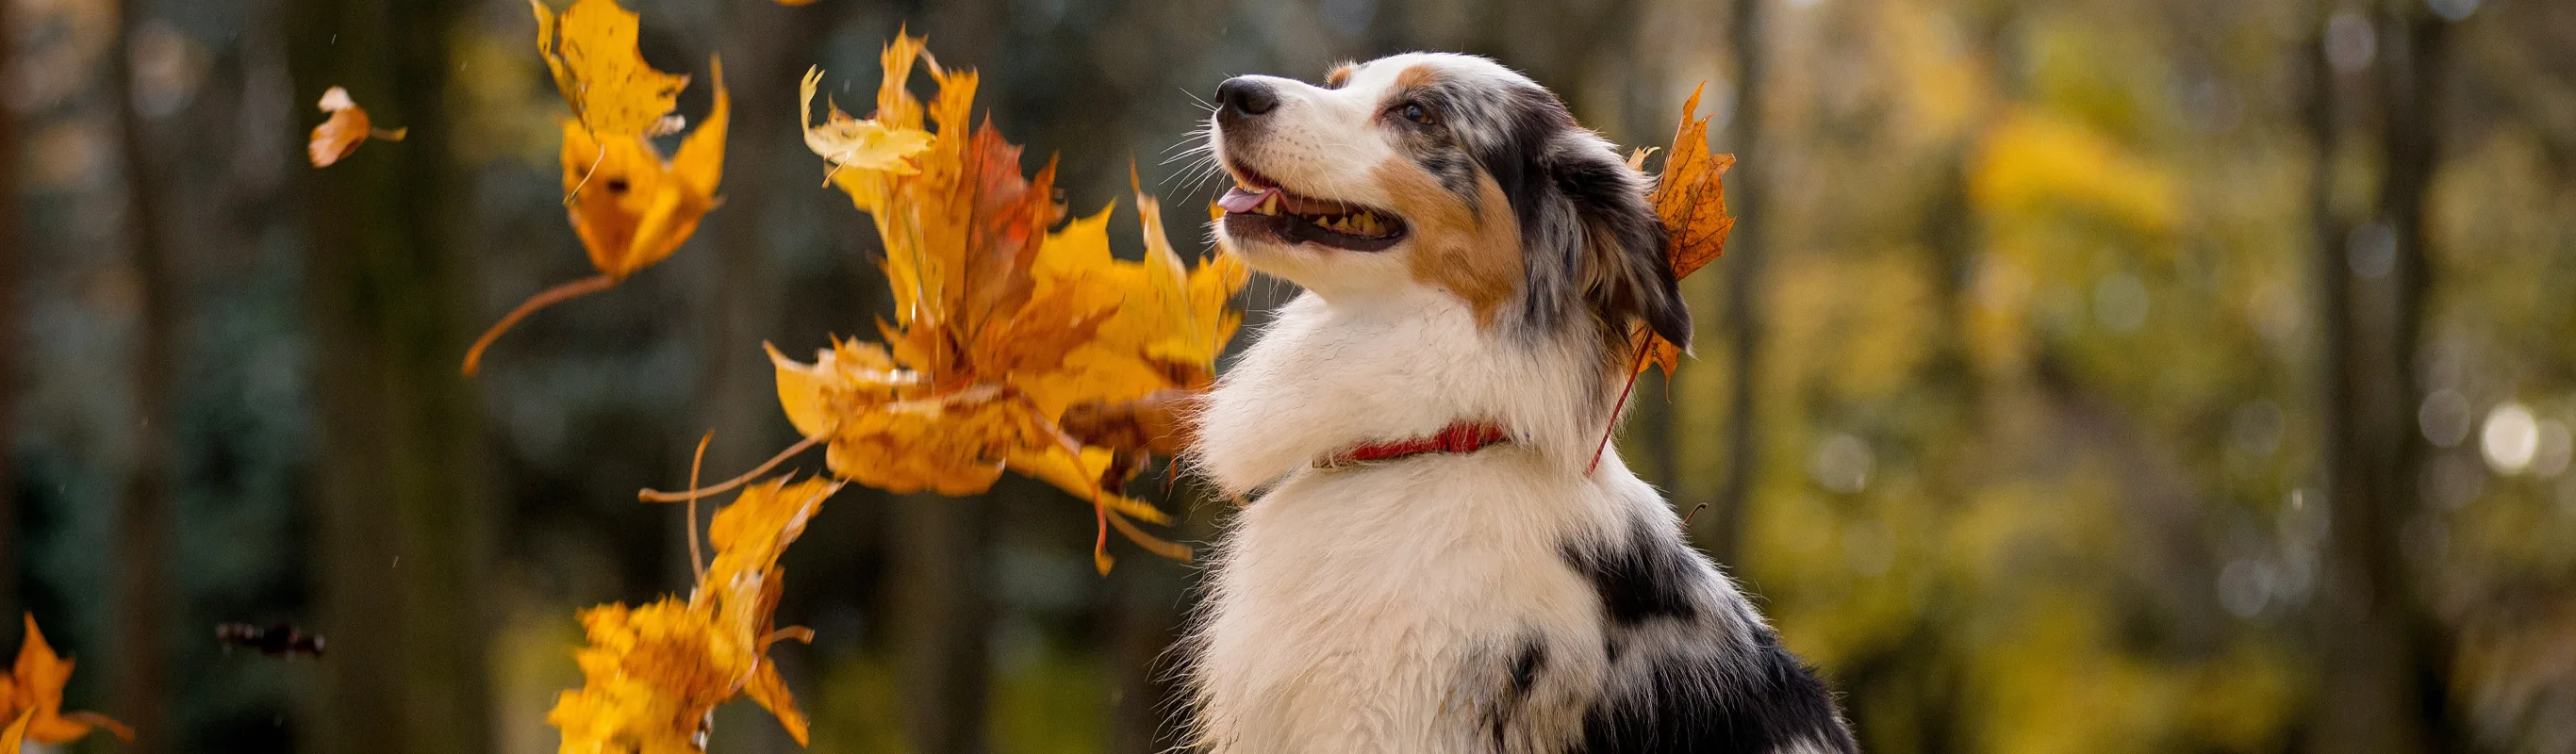 happy dog with leaves falling around him